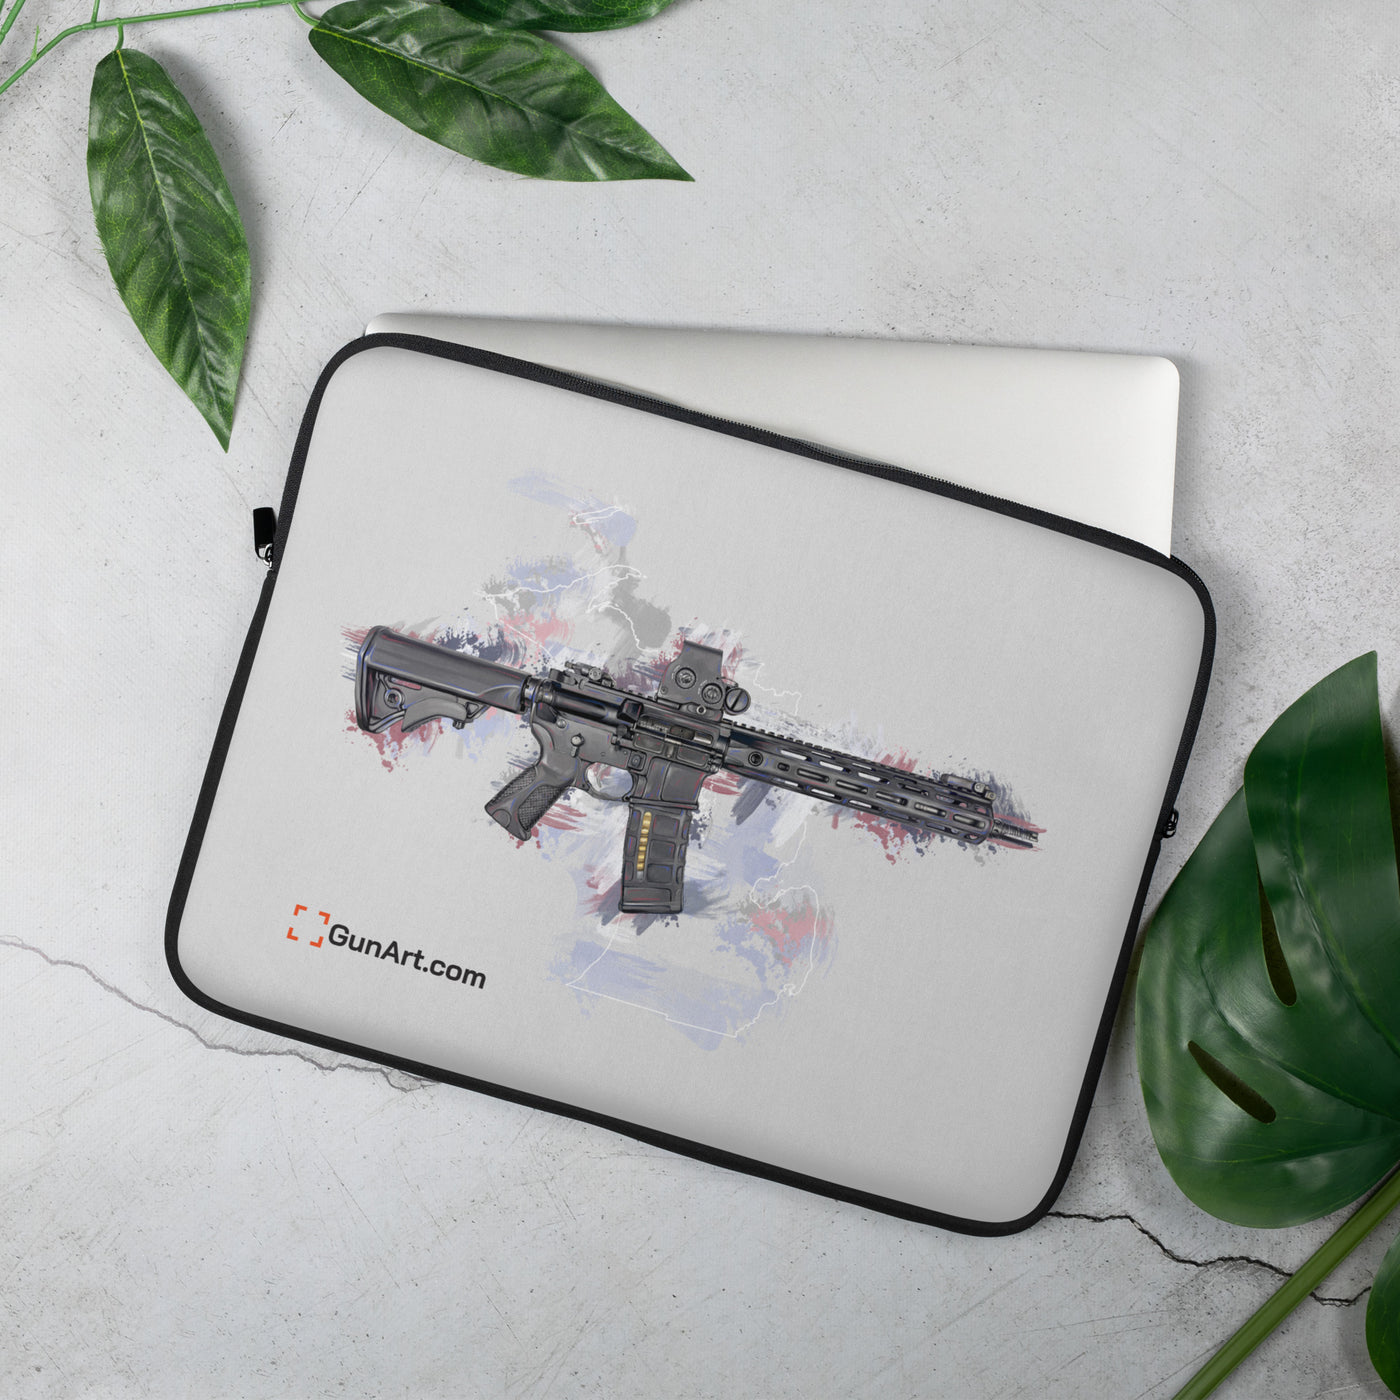 Defending Freedom - Michigan - AR-15 State Laptop Sleeve - White State